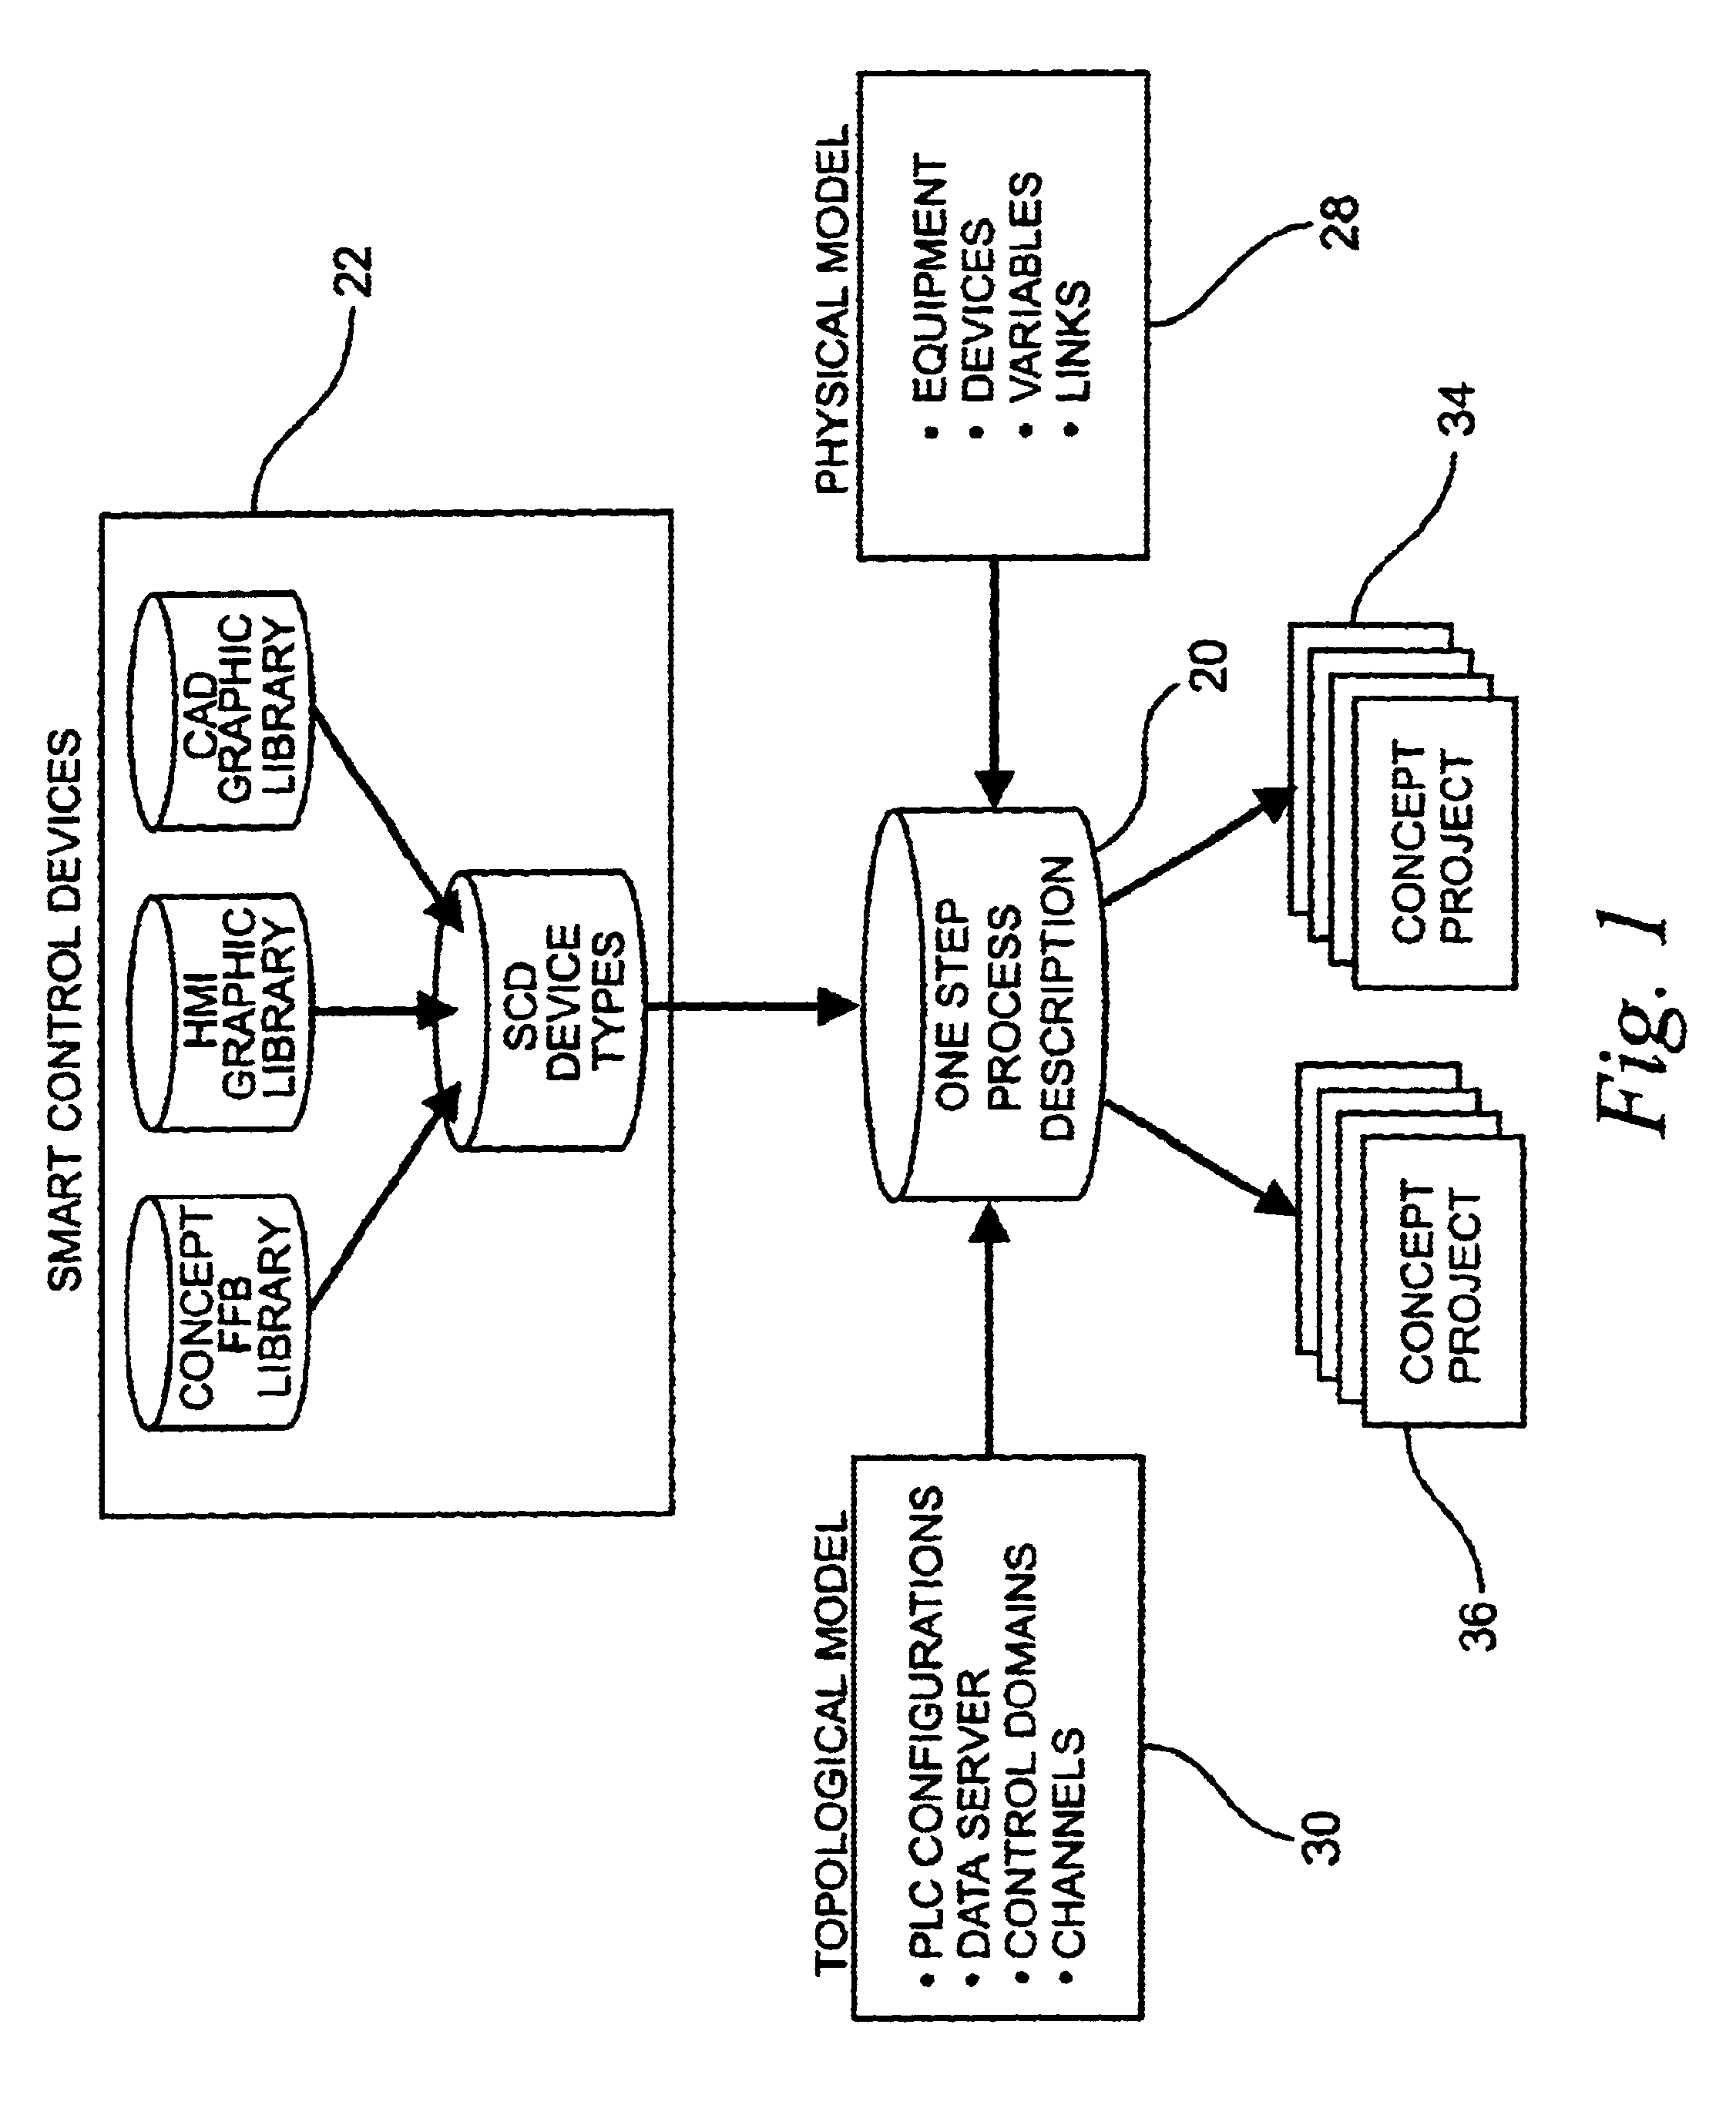 Method and apparatus for generating an application for an automation control system